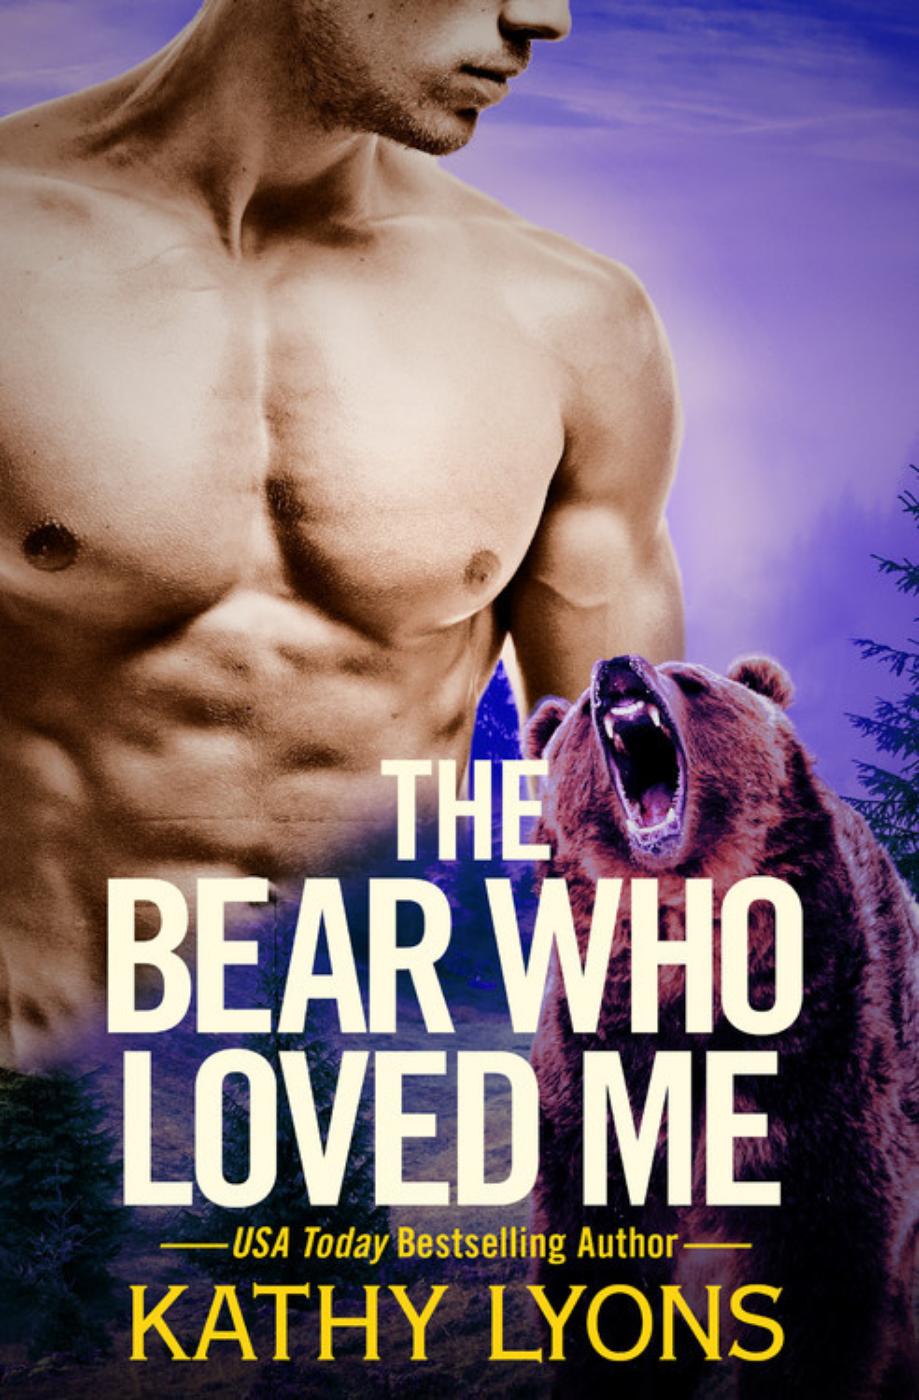 The Bear Who Loved Me (2016) by Kathy Lyons